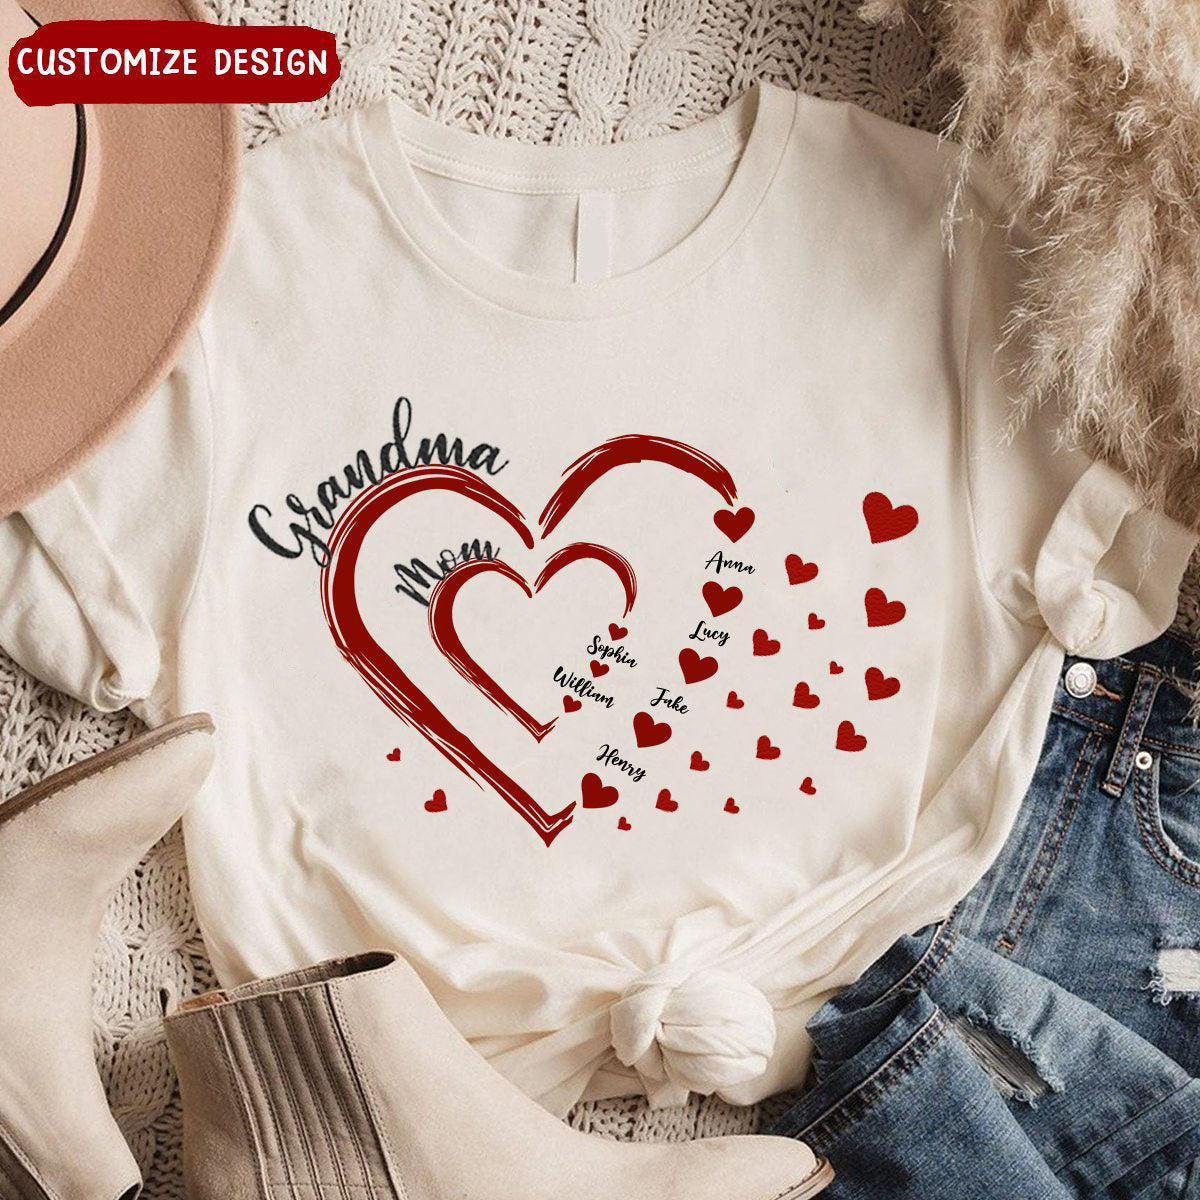 Mom's Grandma's Sweethearts Personalized Shirt - Gift For Mother, Grandmother